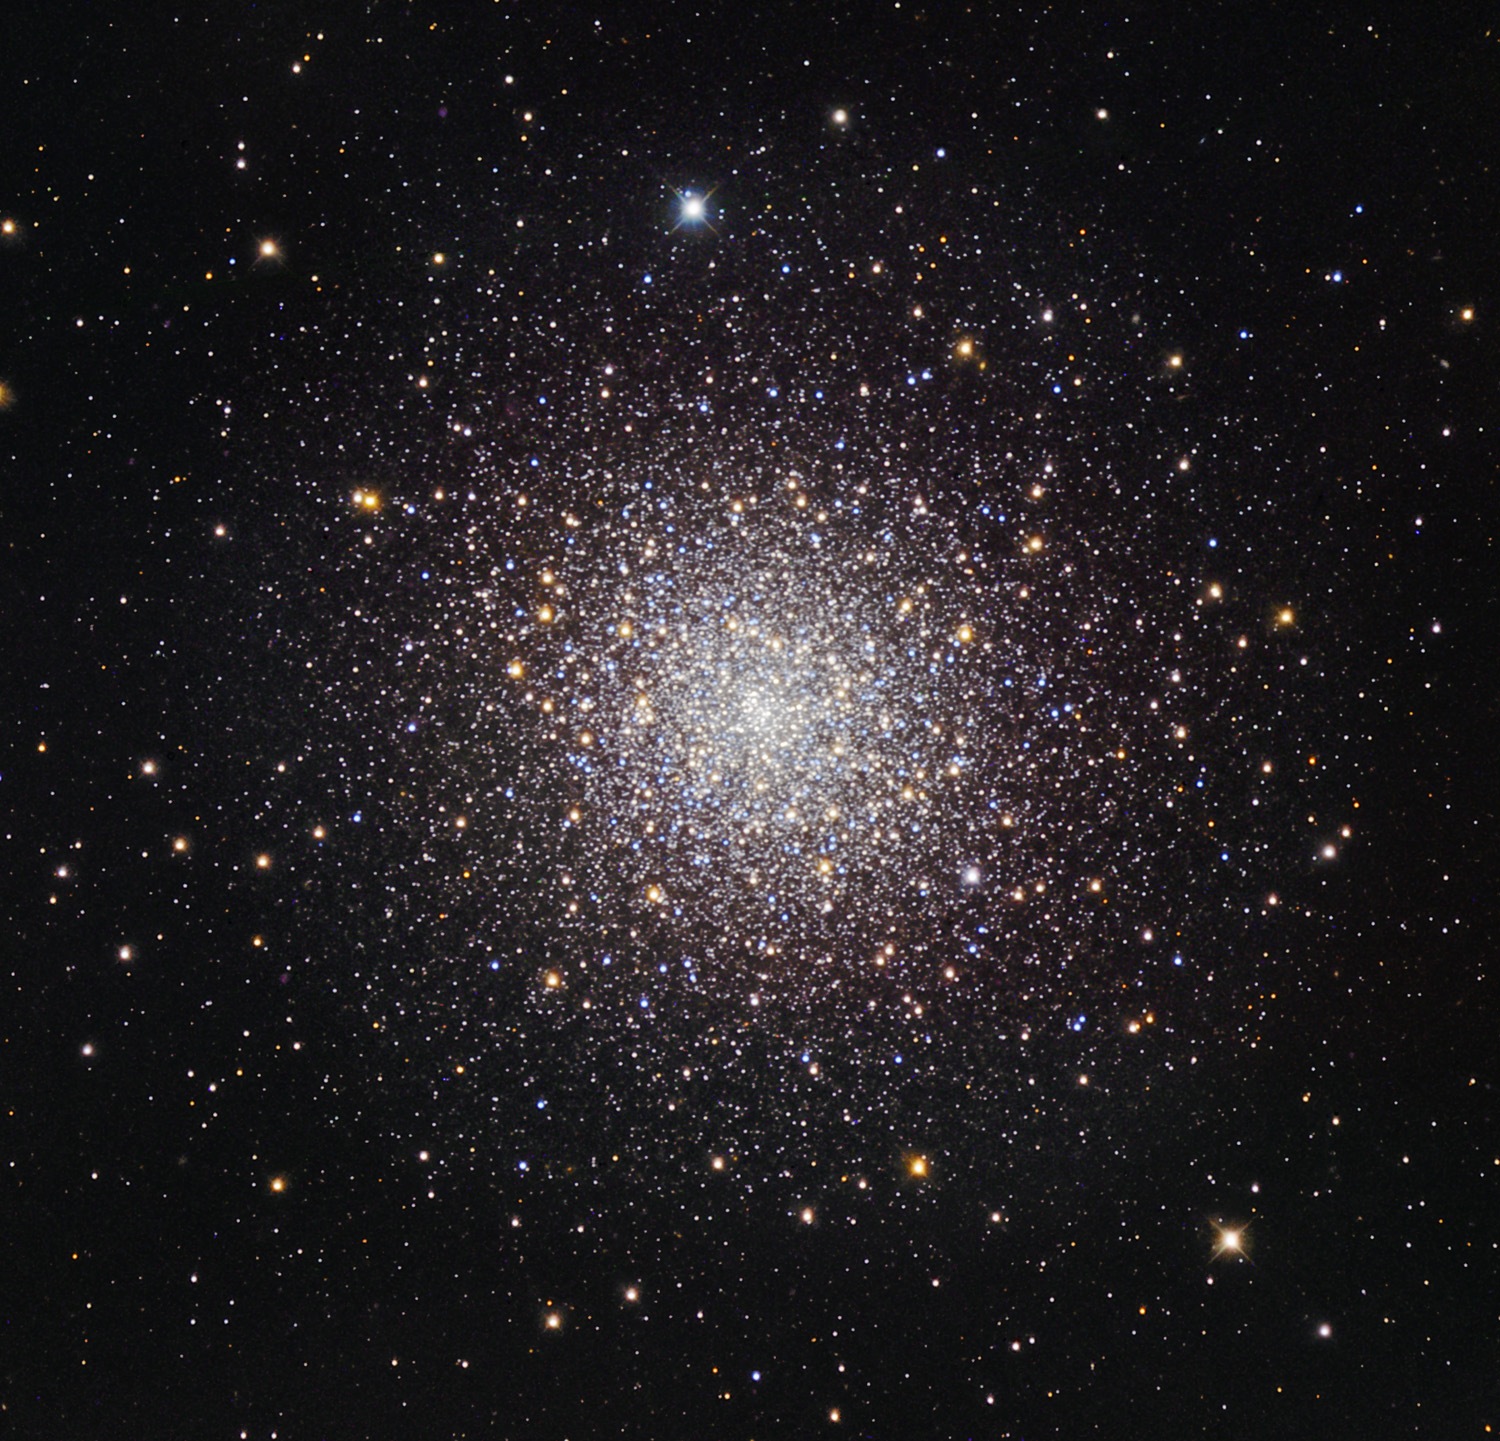 A photo of the globular cluster M92